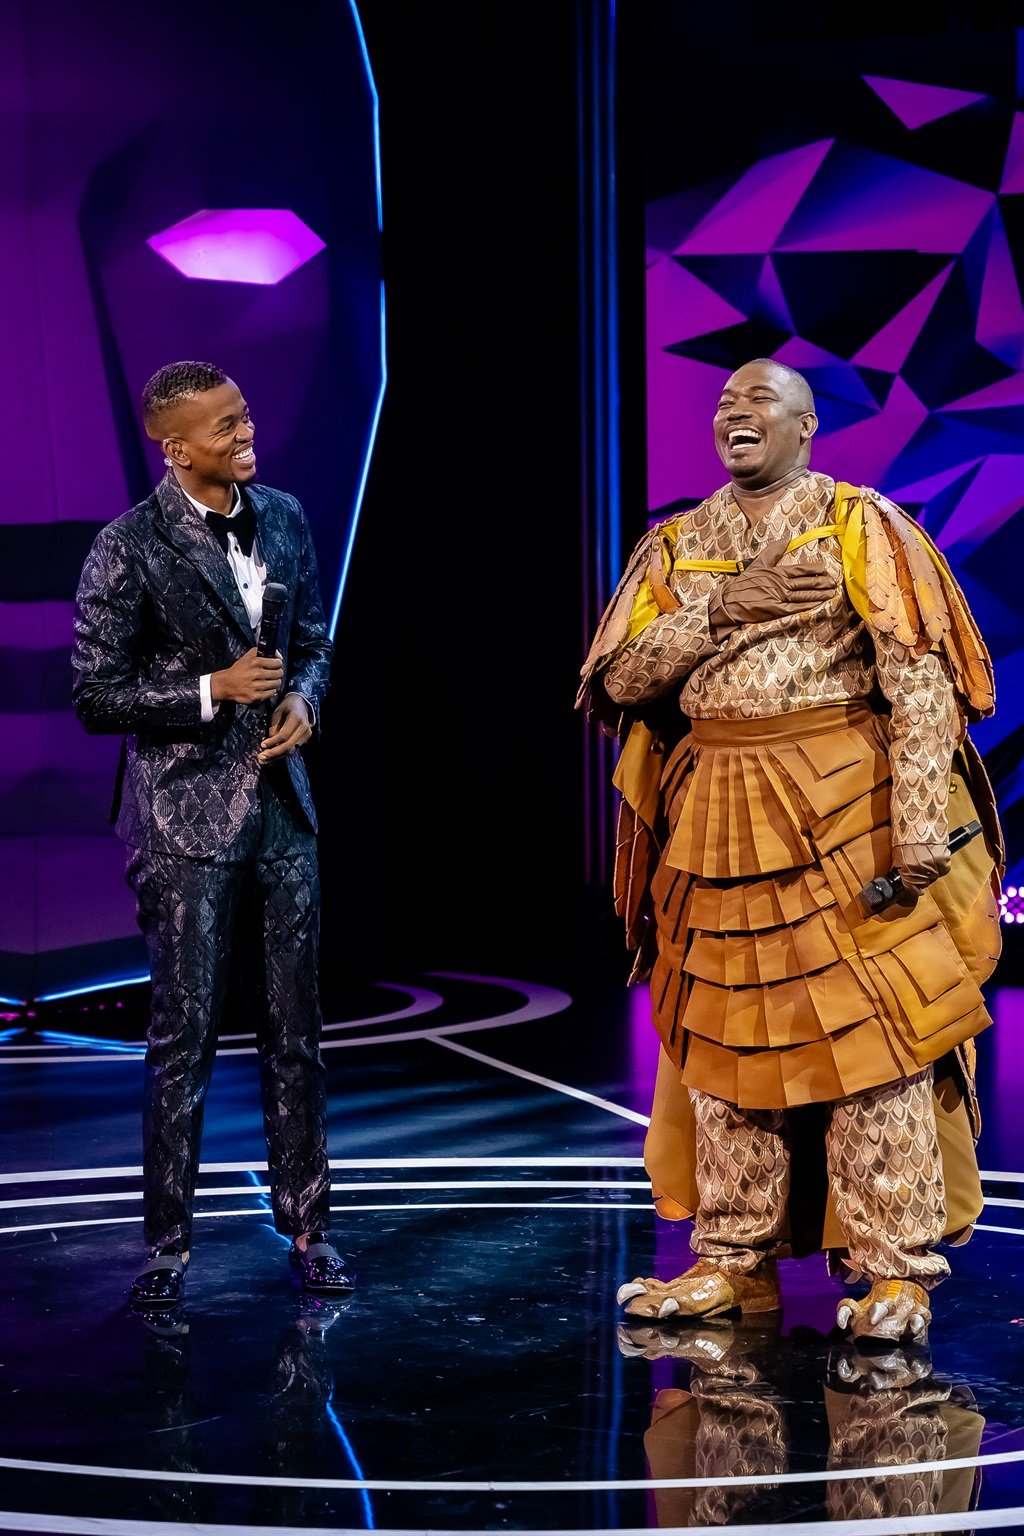  The Masked Singer South Africa Season 2 finale. 